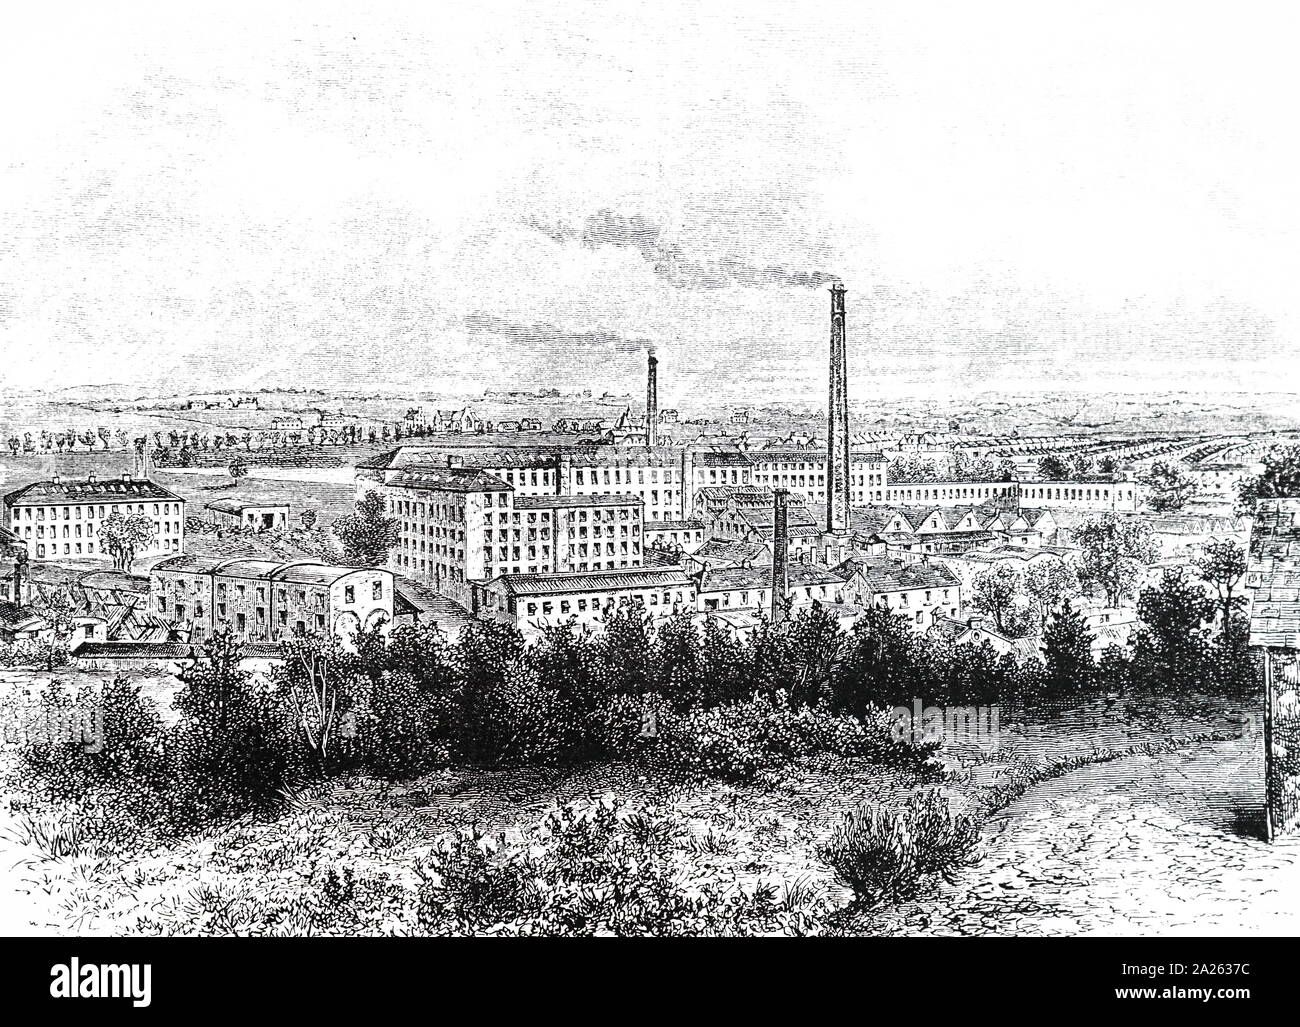 An engraving depicting the Bessbrook Mills and village. Developed in the mid-nineteenth century by a Quaker, John Grubb Richardson, the complex included a Meeting House, chapels, churches, dispensary, school, but no public house. Worker's cottages are visible in the background. Known as the Irish Saltaire. Dated 19th century Stock Photo